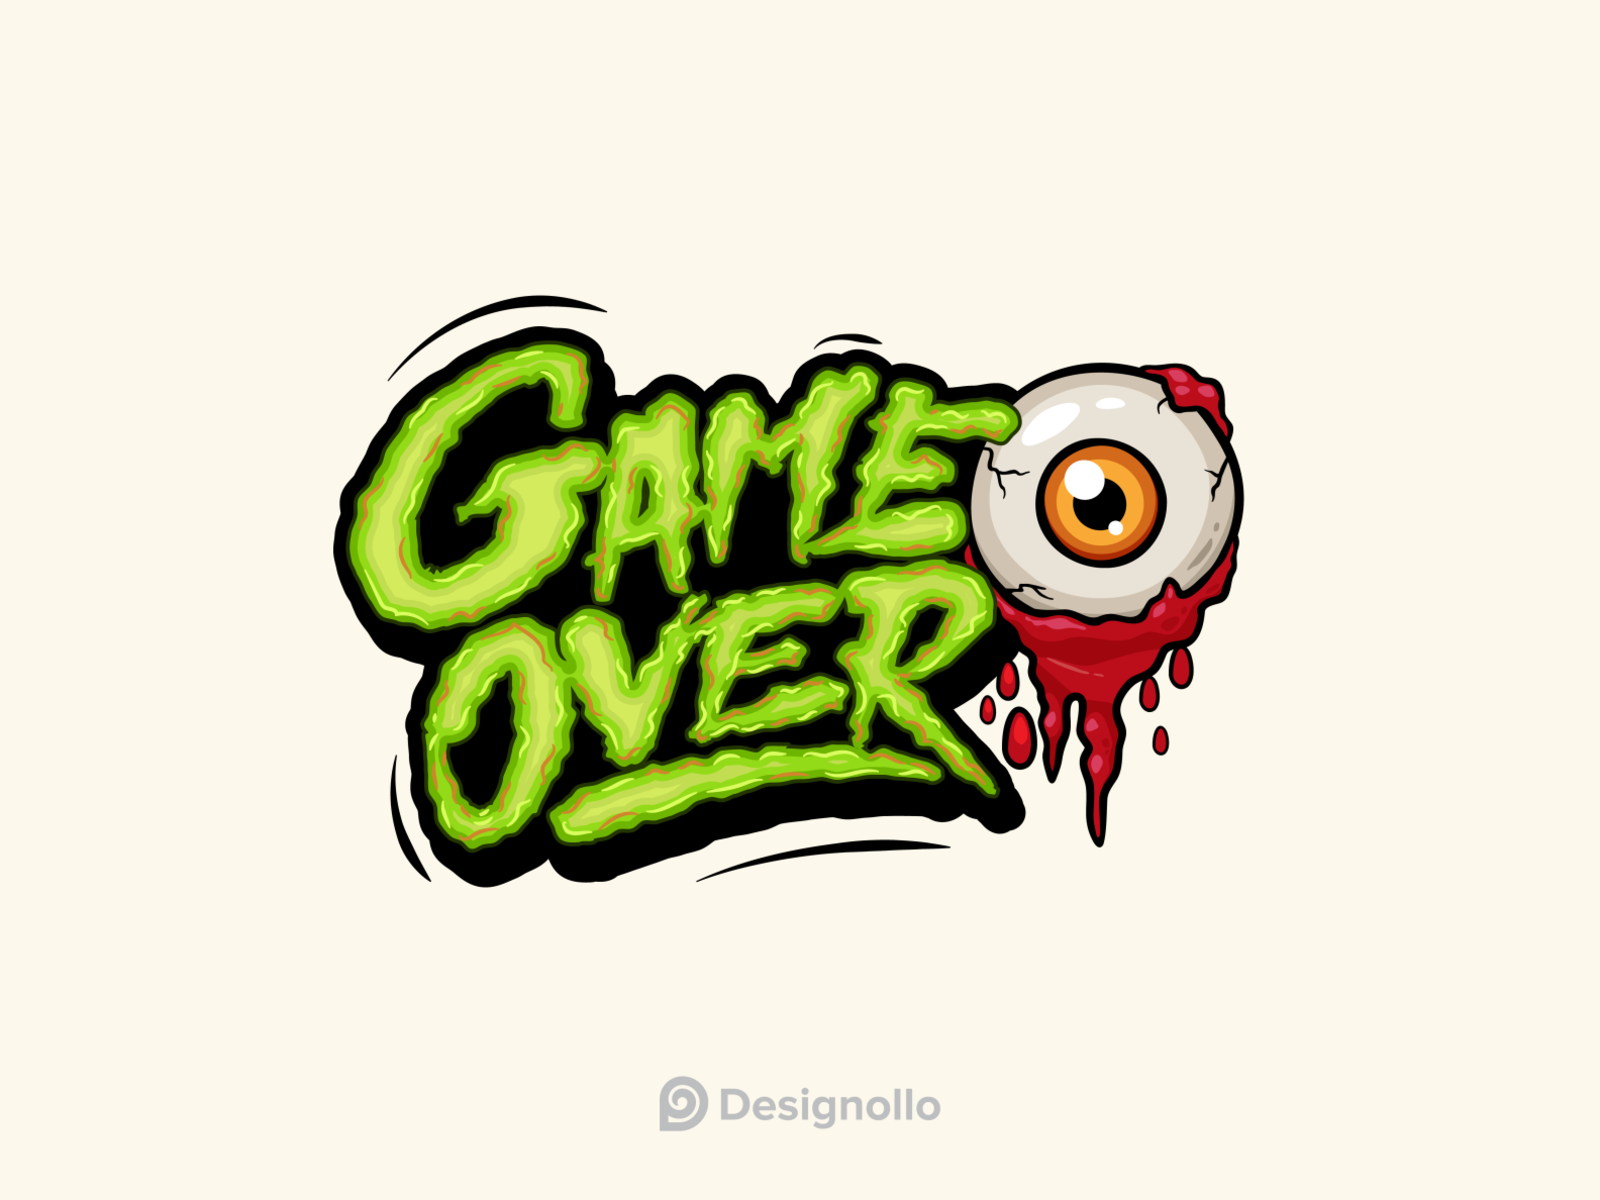 Game Over Ui PNG Image, Game Over Ui, Game, Over, Ui PNG Image For Free  Download | Game design, Button game, Cartoon posters